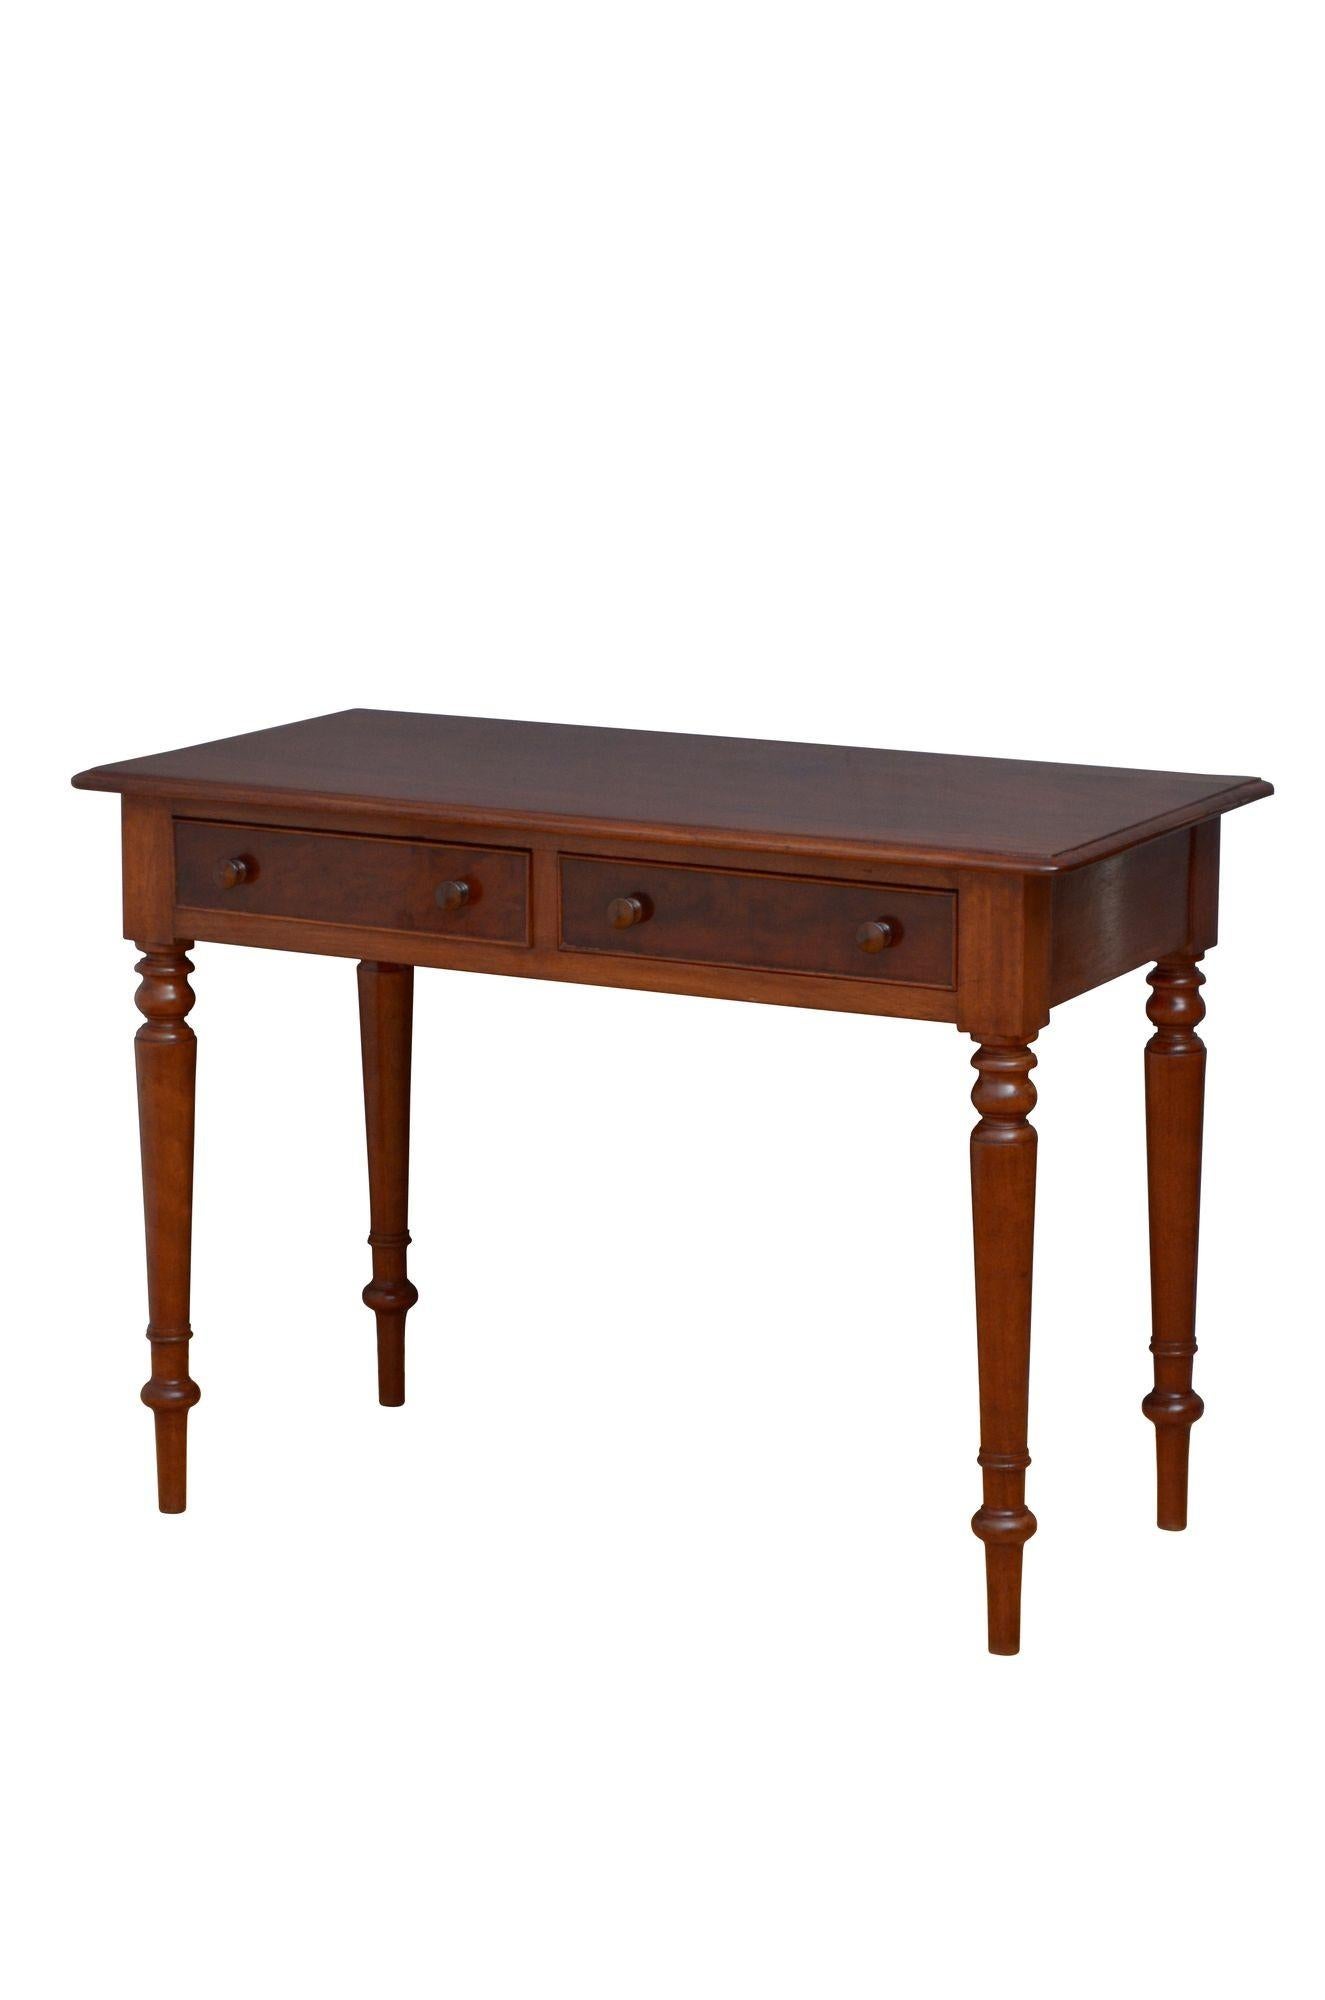 K0272 Fine quality, solid mahogany Victorian side table / writing table / dressing table, having figured, solid mahogany top with moulded edge above two oak lined drawers fitted with cockbeaded edge and turned knobs, all standing on slender turned